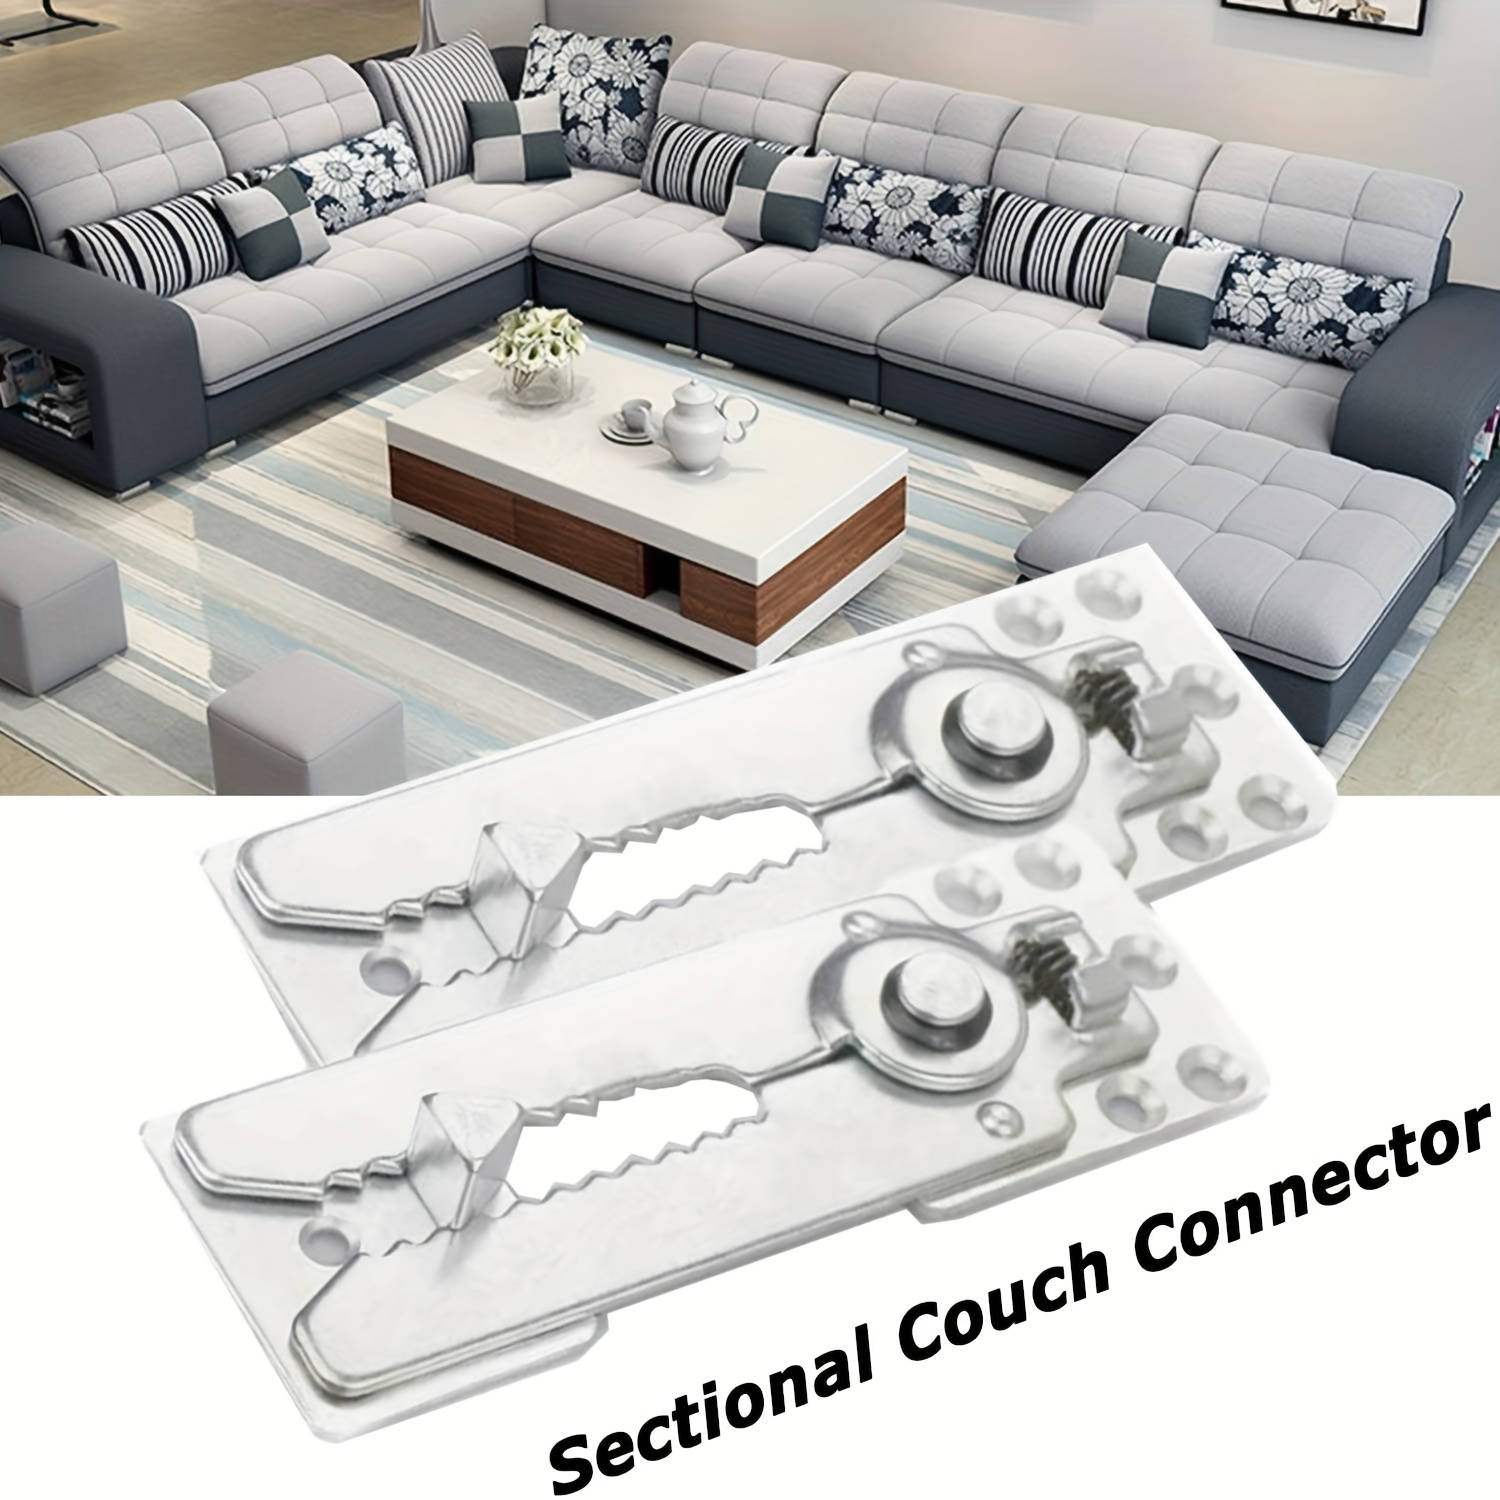 Sectional Couch Connectors : r/DIY